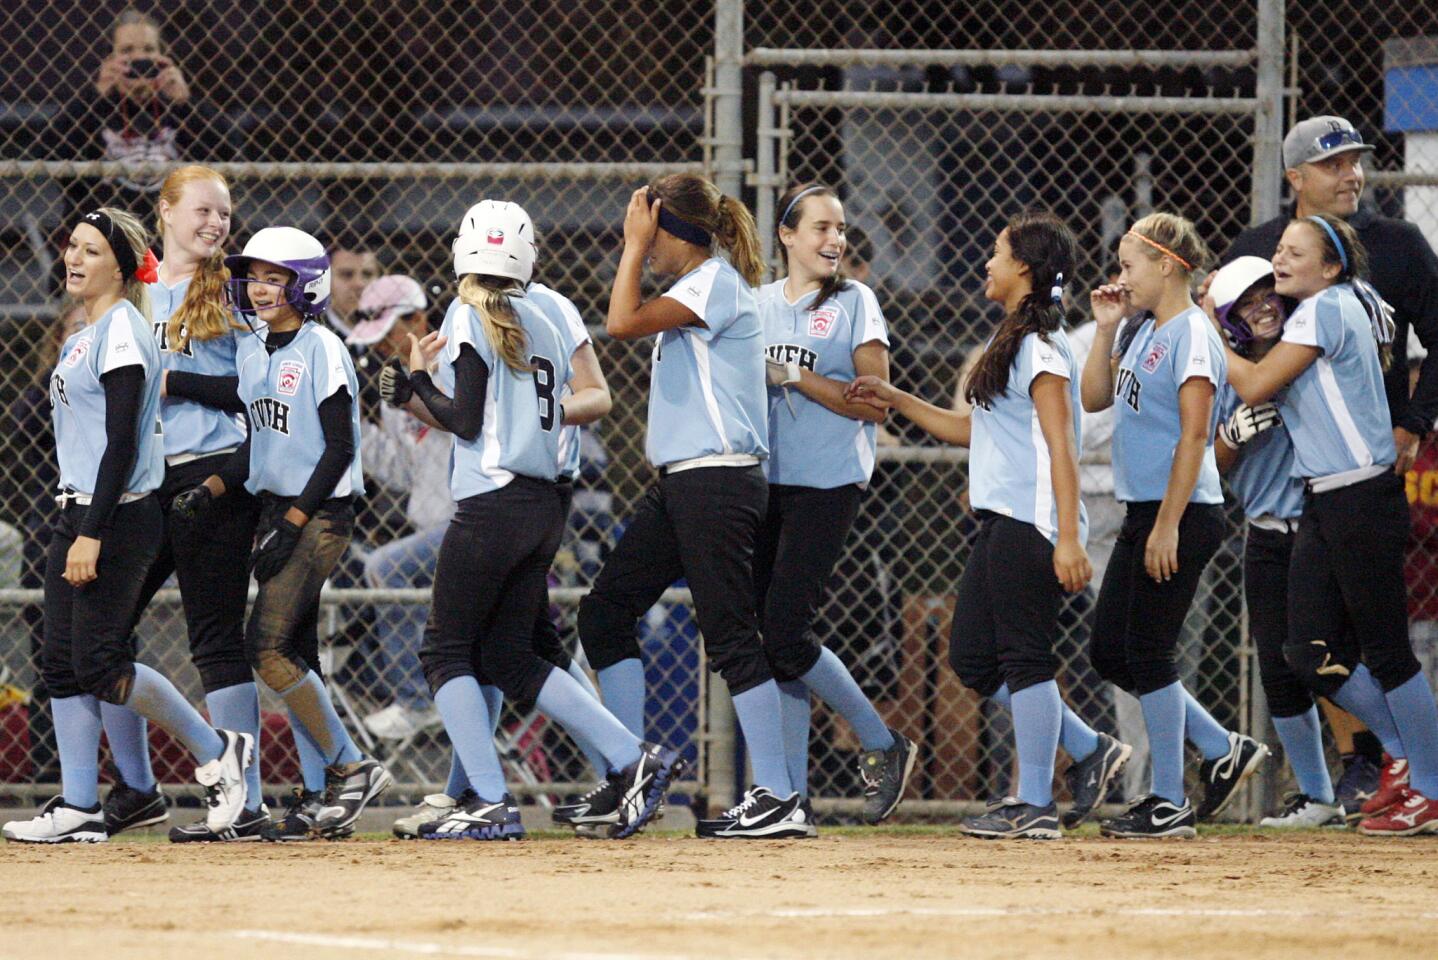 CV rejoices after winning a game against Westchester at Kent D. Face Field in Westchester on Thursday, July 26, 2012. CV wins the championship game against Westchester.